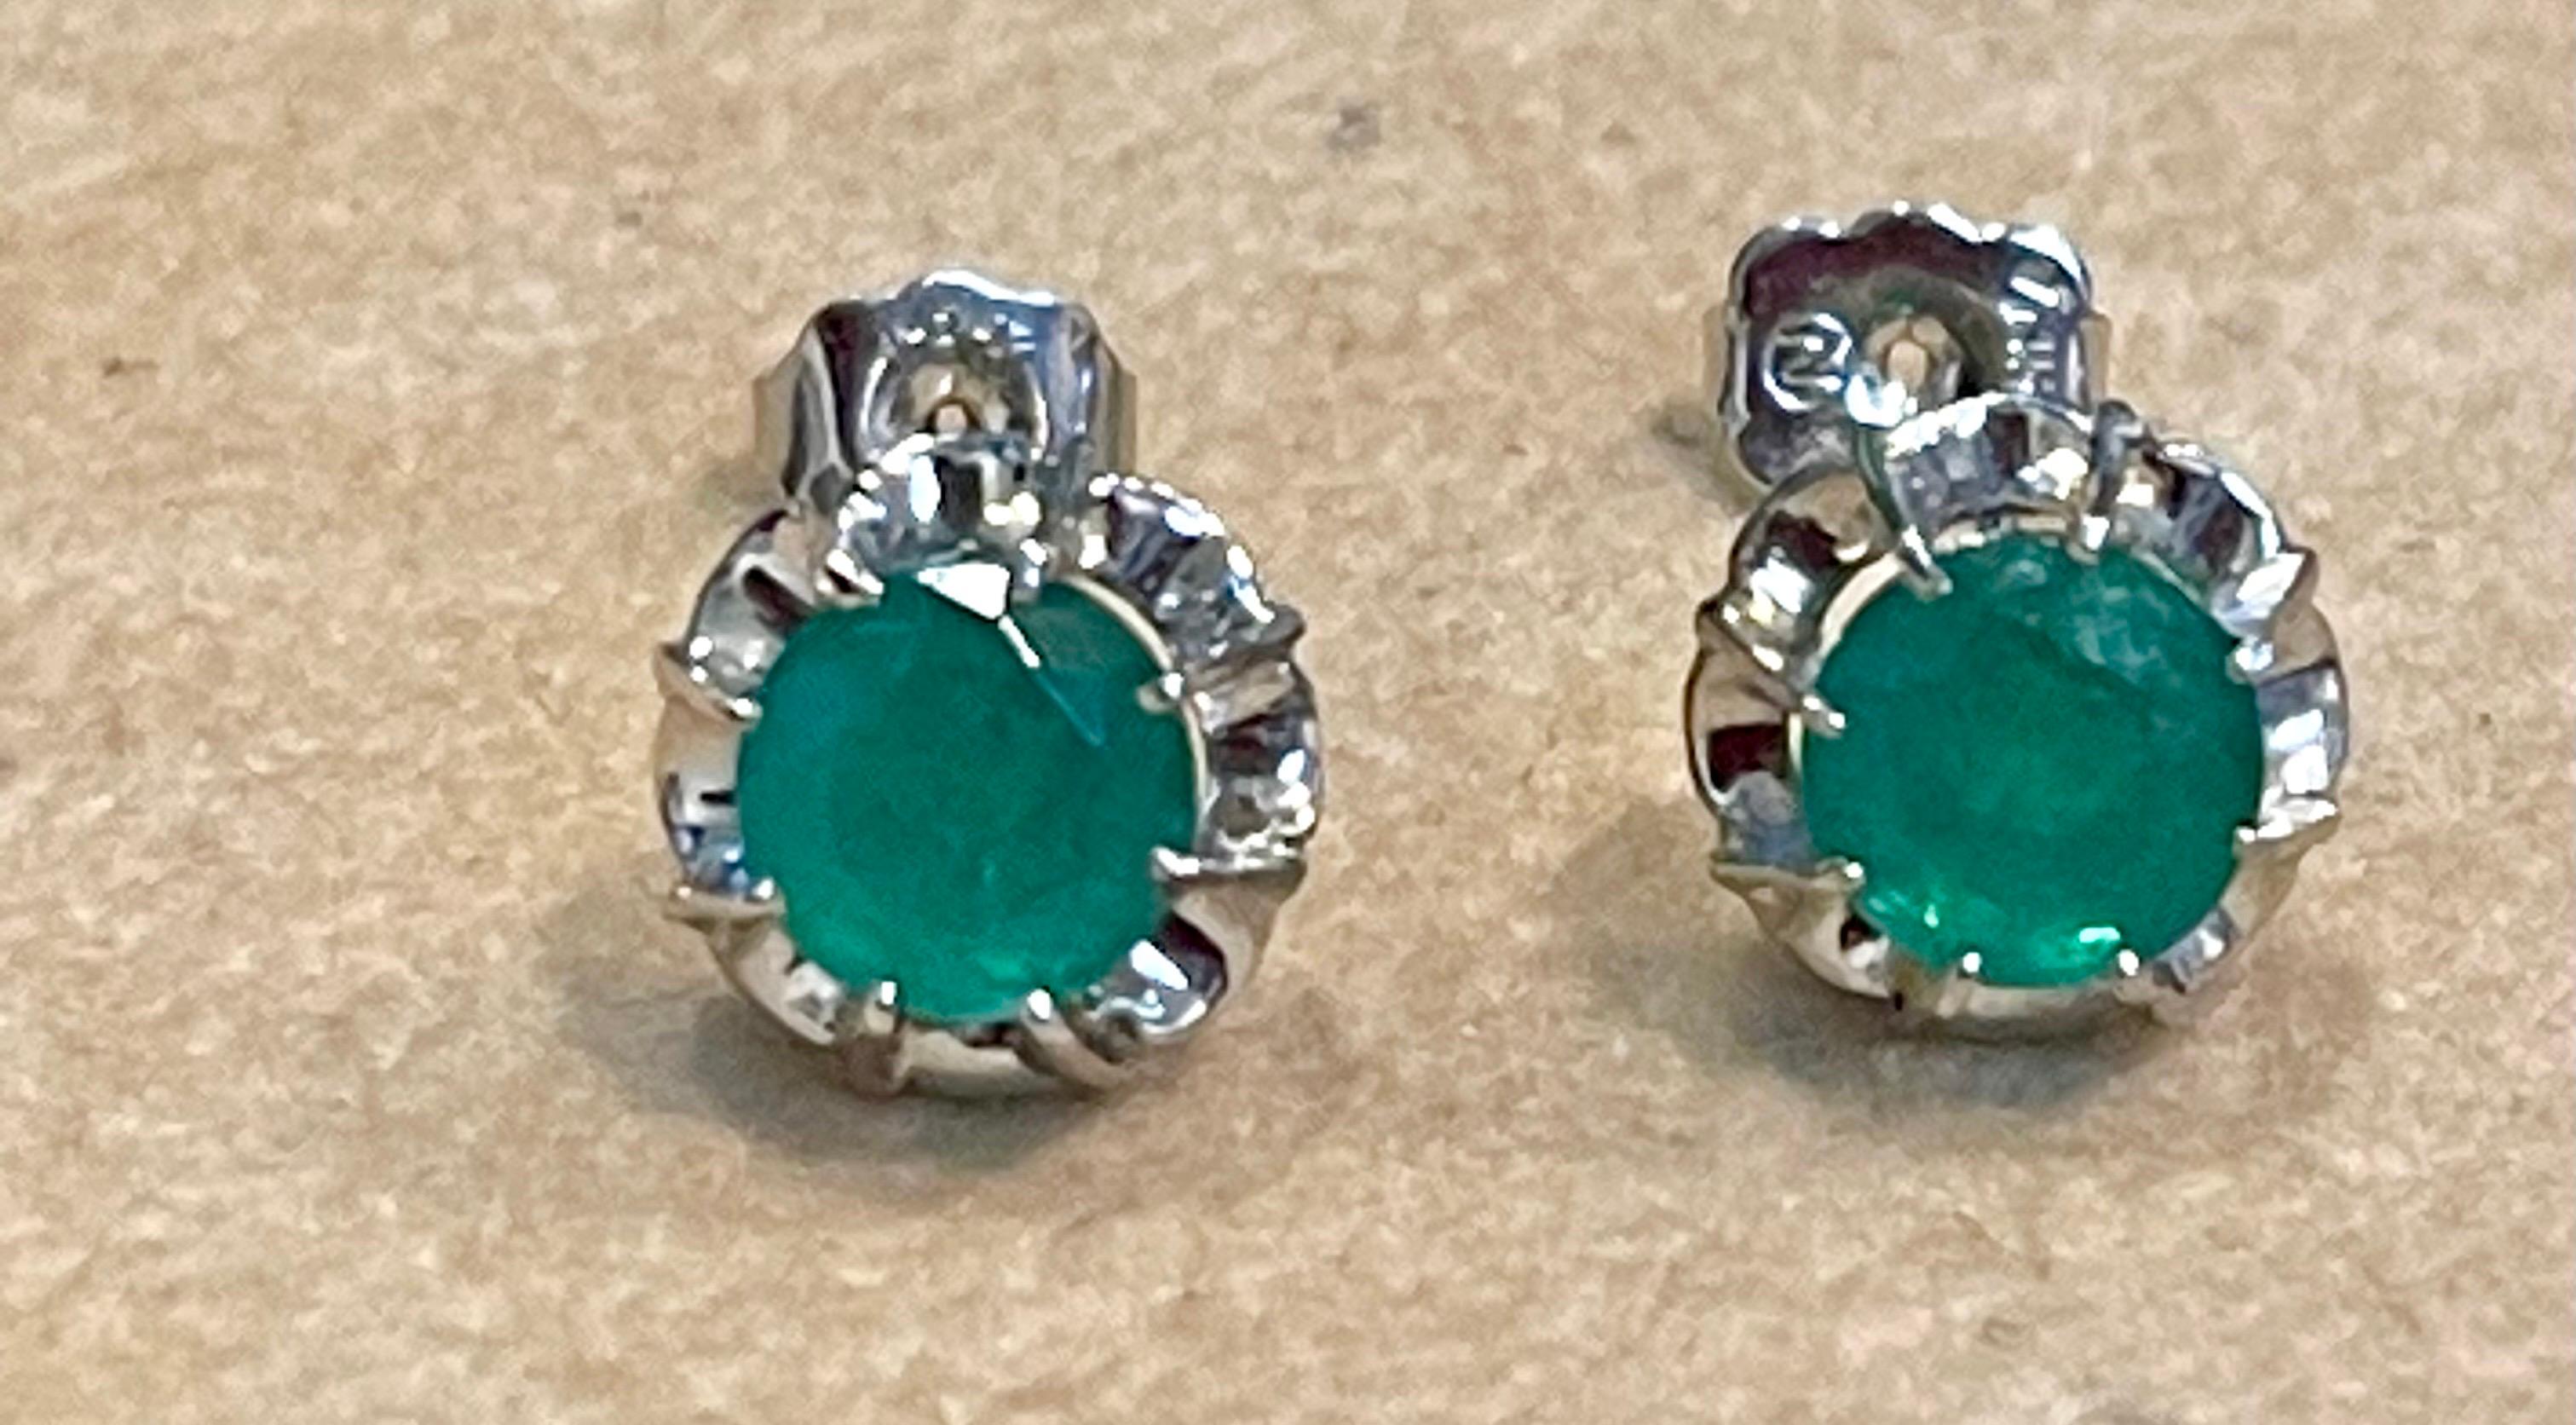 
Approximately 2 Carat Round Natural Emerald  Stud Post Earrings 18 Karat White Gold
Two emerald weighing Approximately  1 ct each 
7 MM Round Emerald 
Each Emerald is  approximately 1 ct or little bigger
Nice quality of emerald is used to make